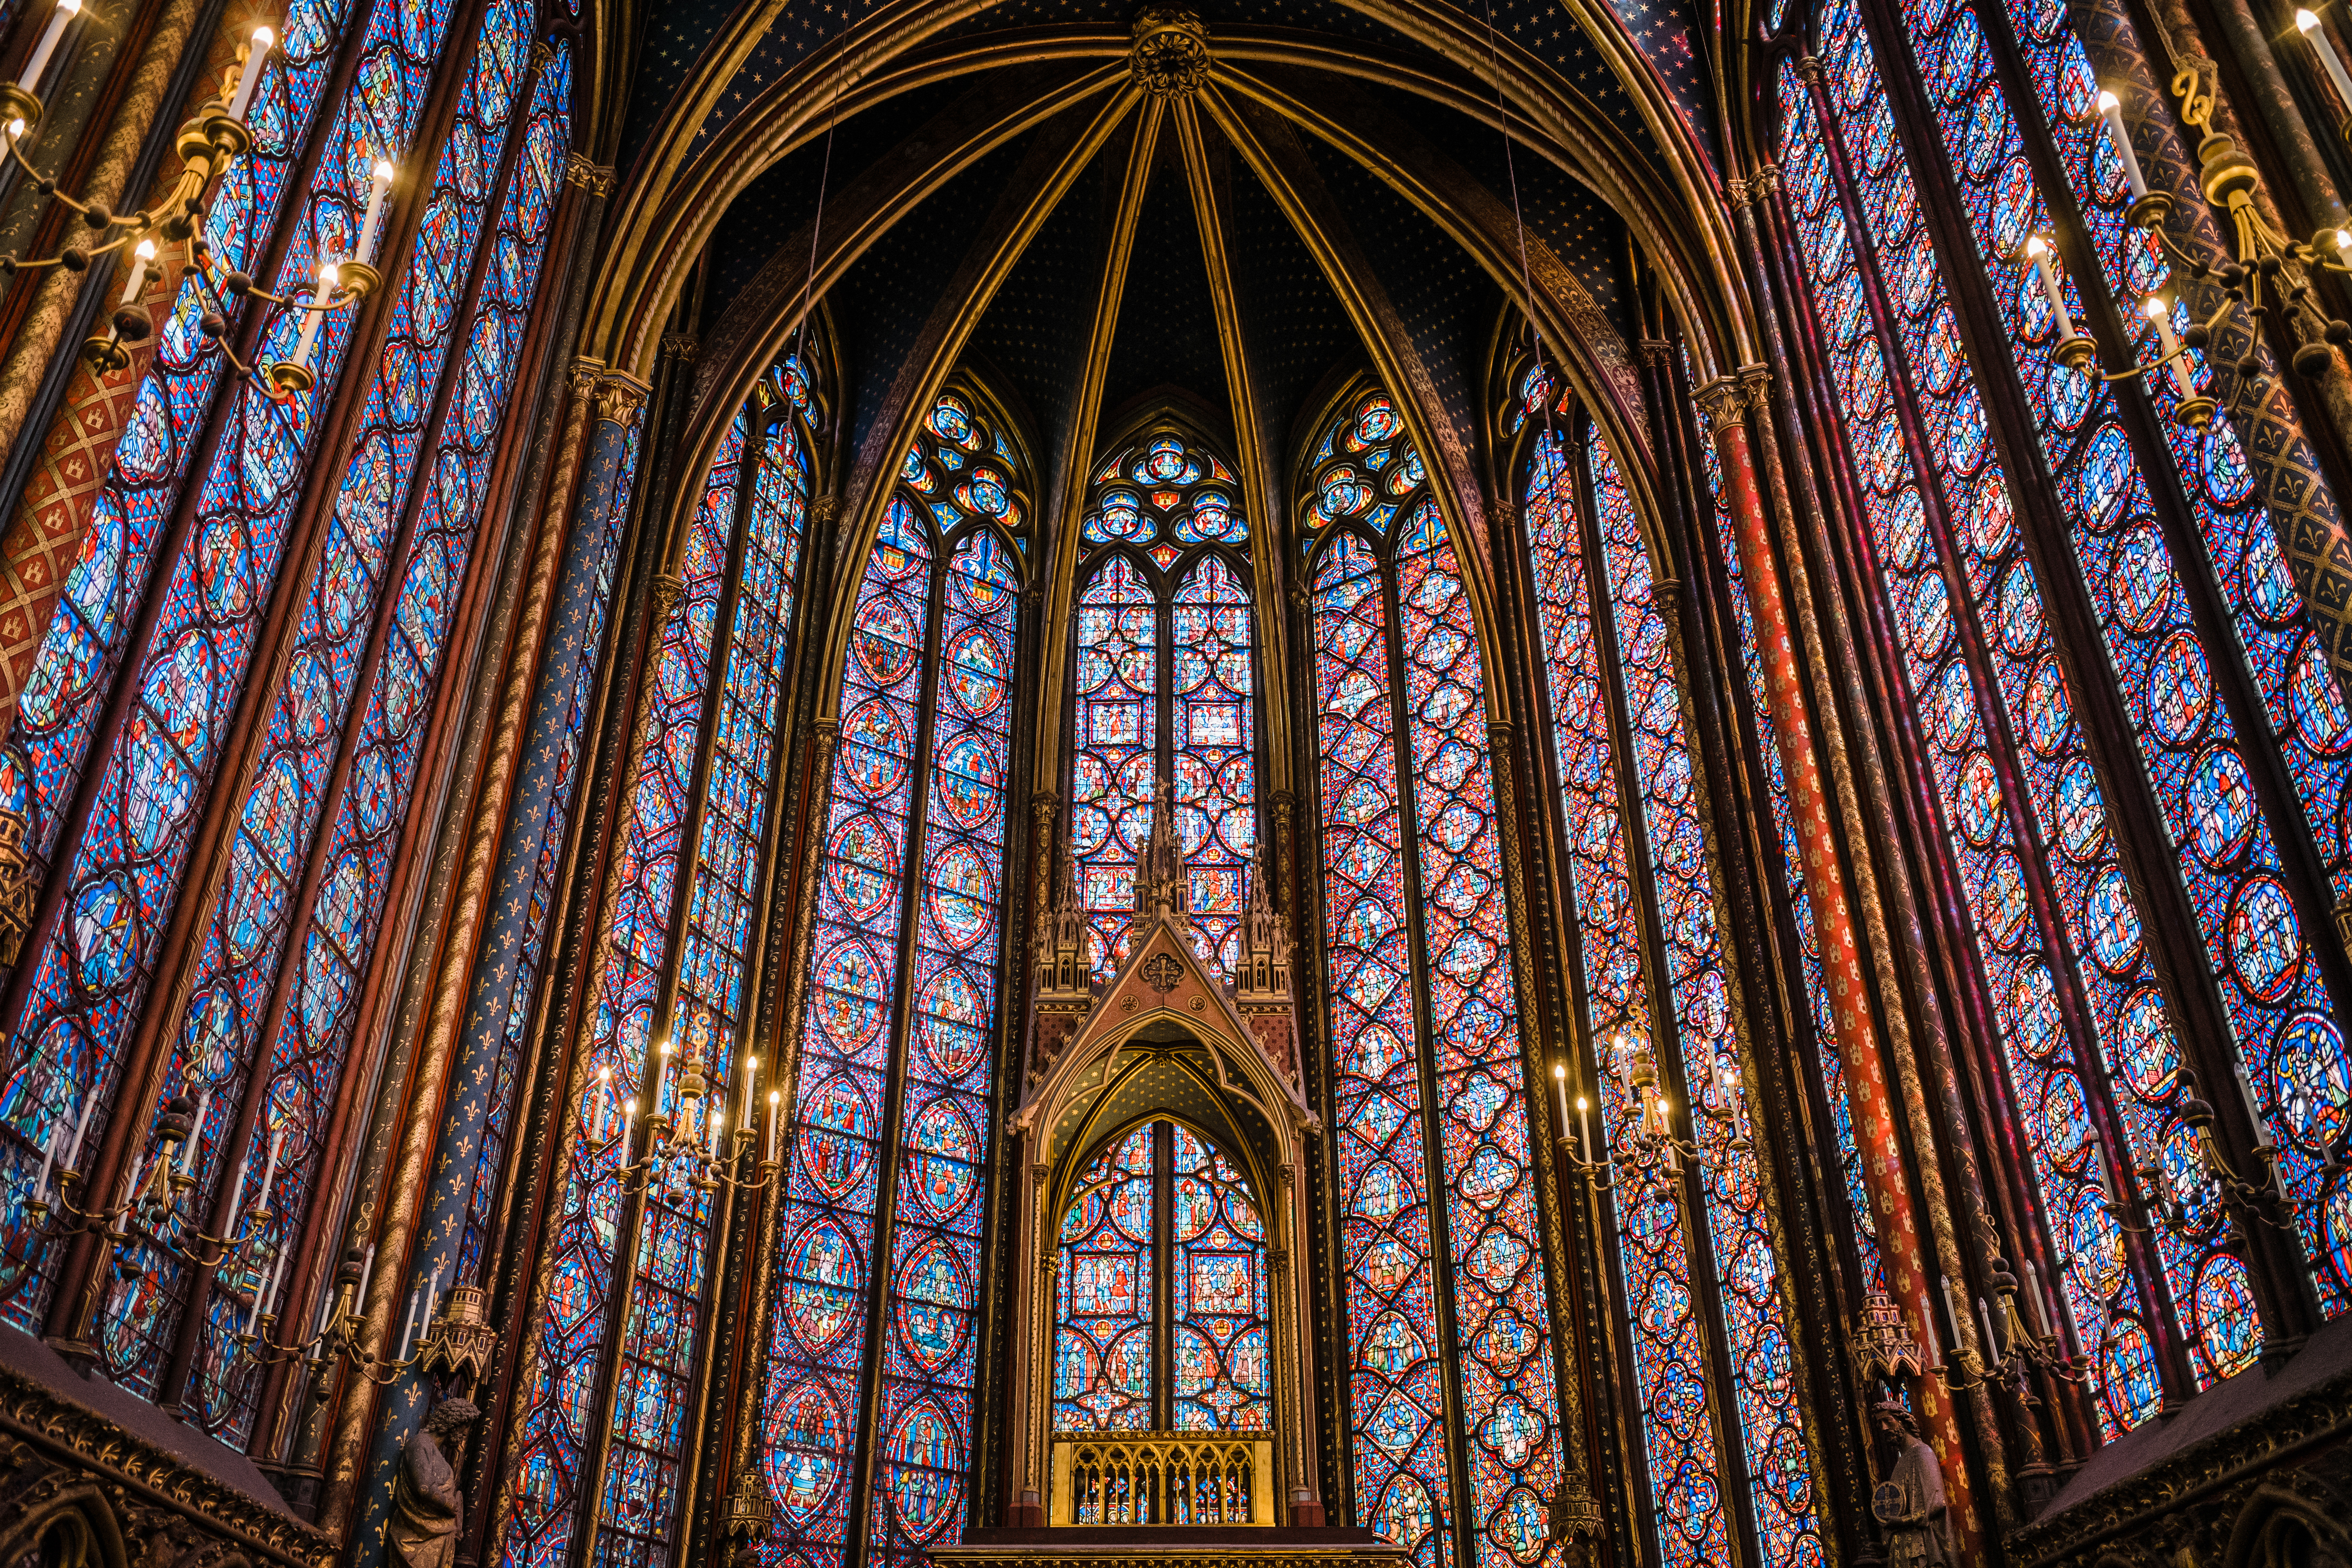 The interior of a chapelle with gold detailing and blue,read,purple, and yellow arched stained glass windows.